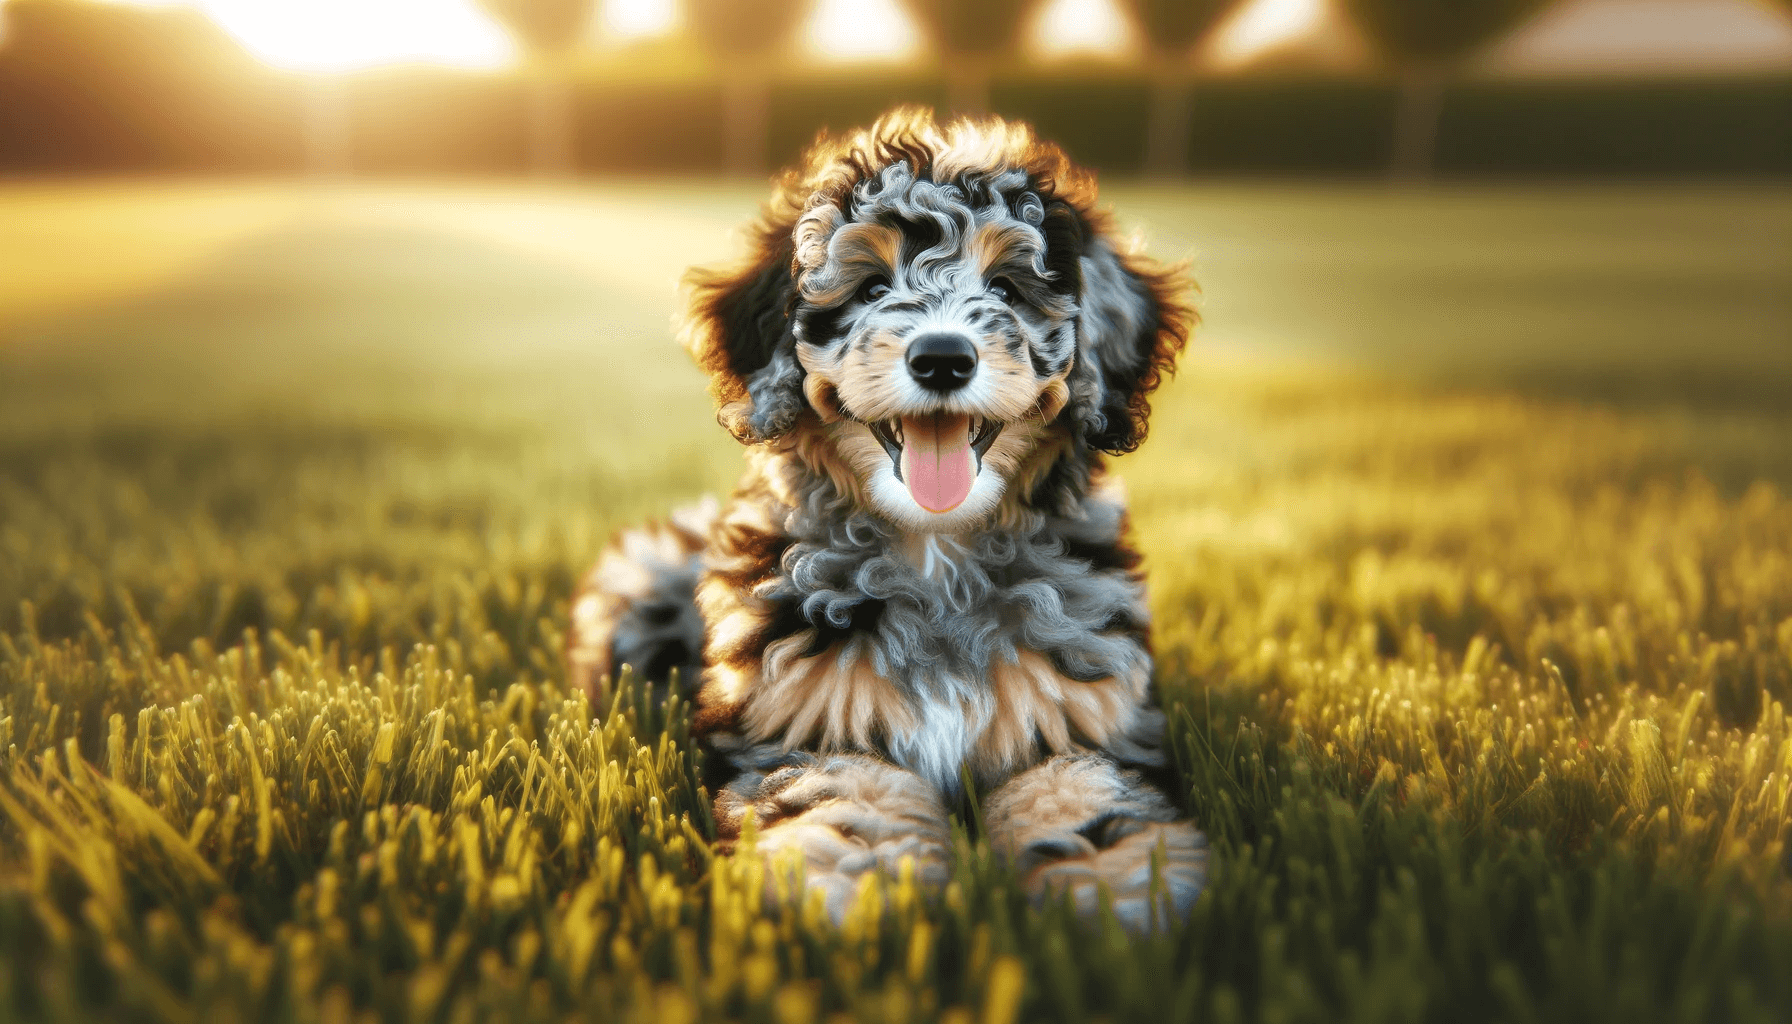 Merle Aussiedoodle puppy sitting on grass with its tongue out in a happy pant, showcasing the breed's unique merle coat pattern and a zest for life.